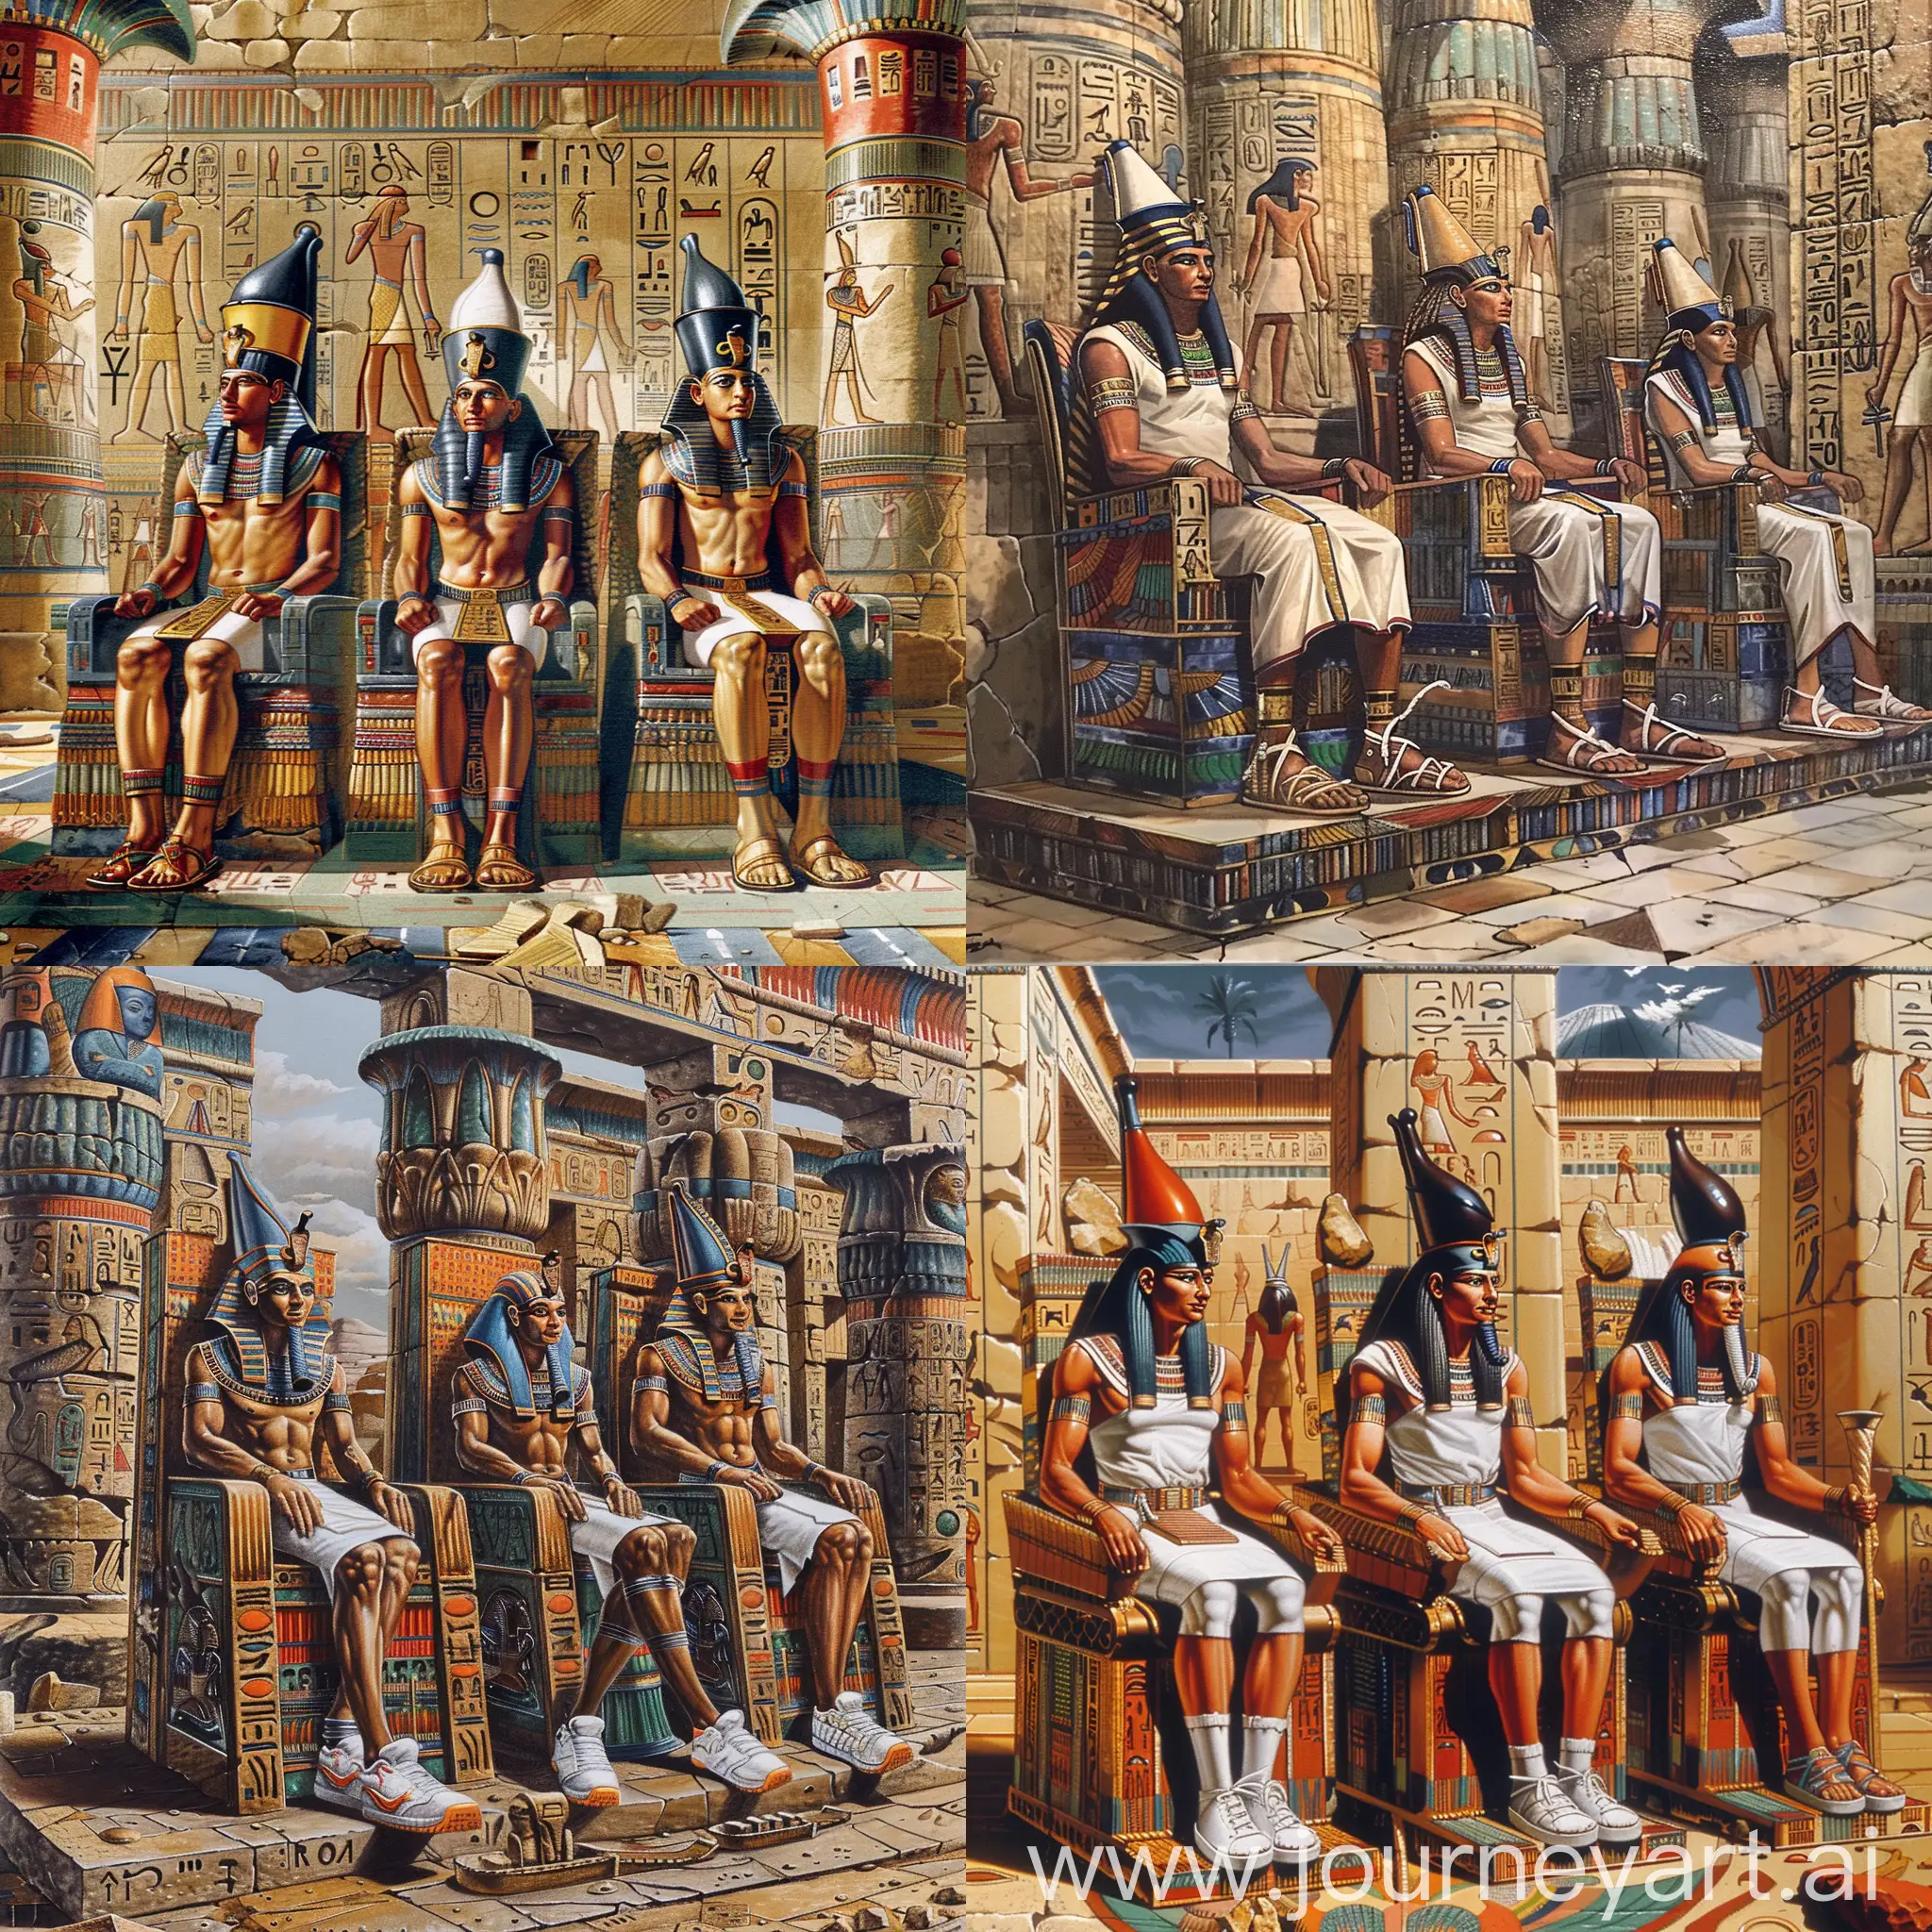 Painting mode :

Three Egyptian Gods are sitting on their imperial thrones. They all wear Egyptian shoes.

The first left one is Egyptian god Ra.

The second middle one is Egyptian god Atum.

The third left one is Egyptian god Khepri.

They are all inside a splendid Egyptian temple.